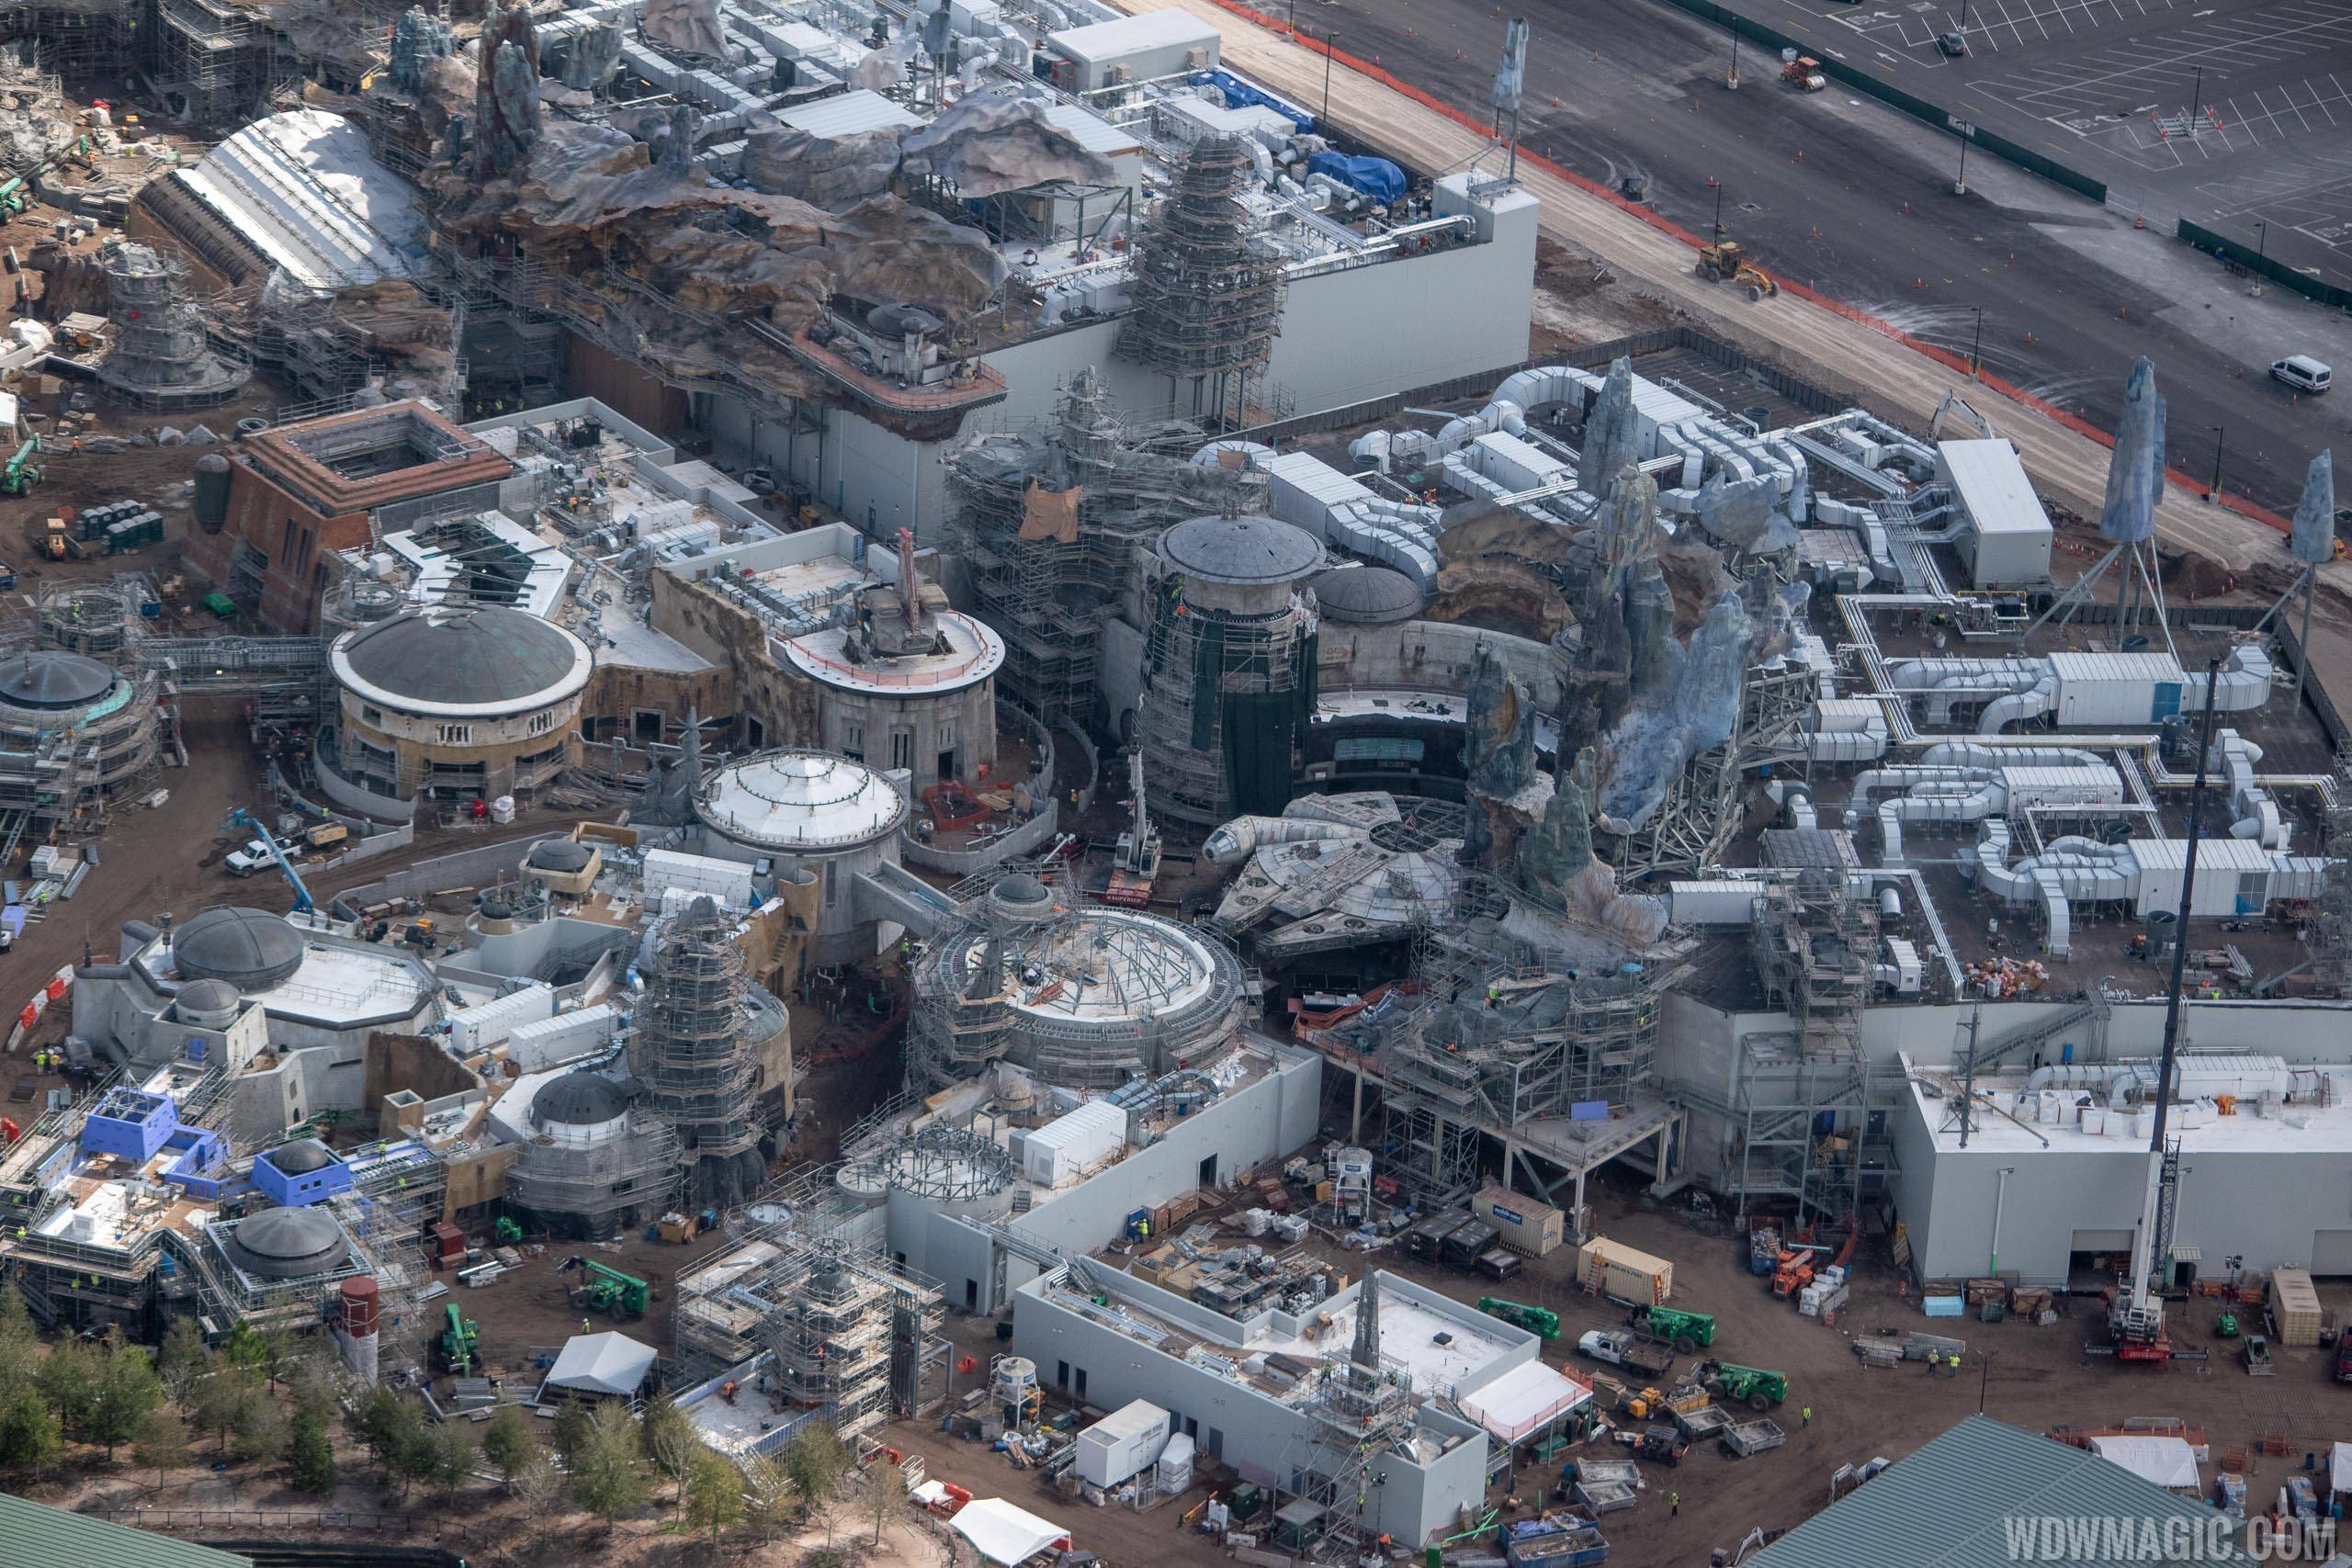 Star Wars Galaxy's Edge aerial pictures - February 2019